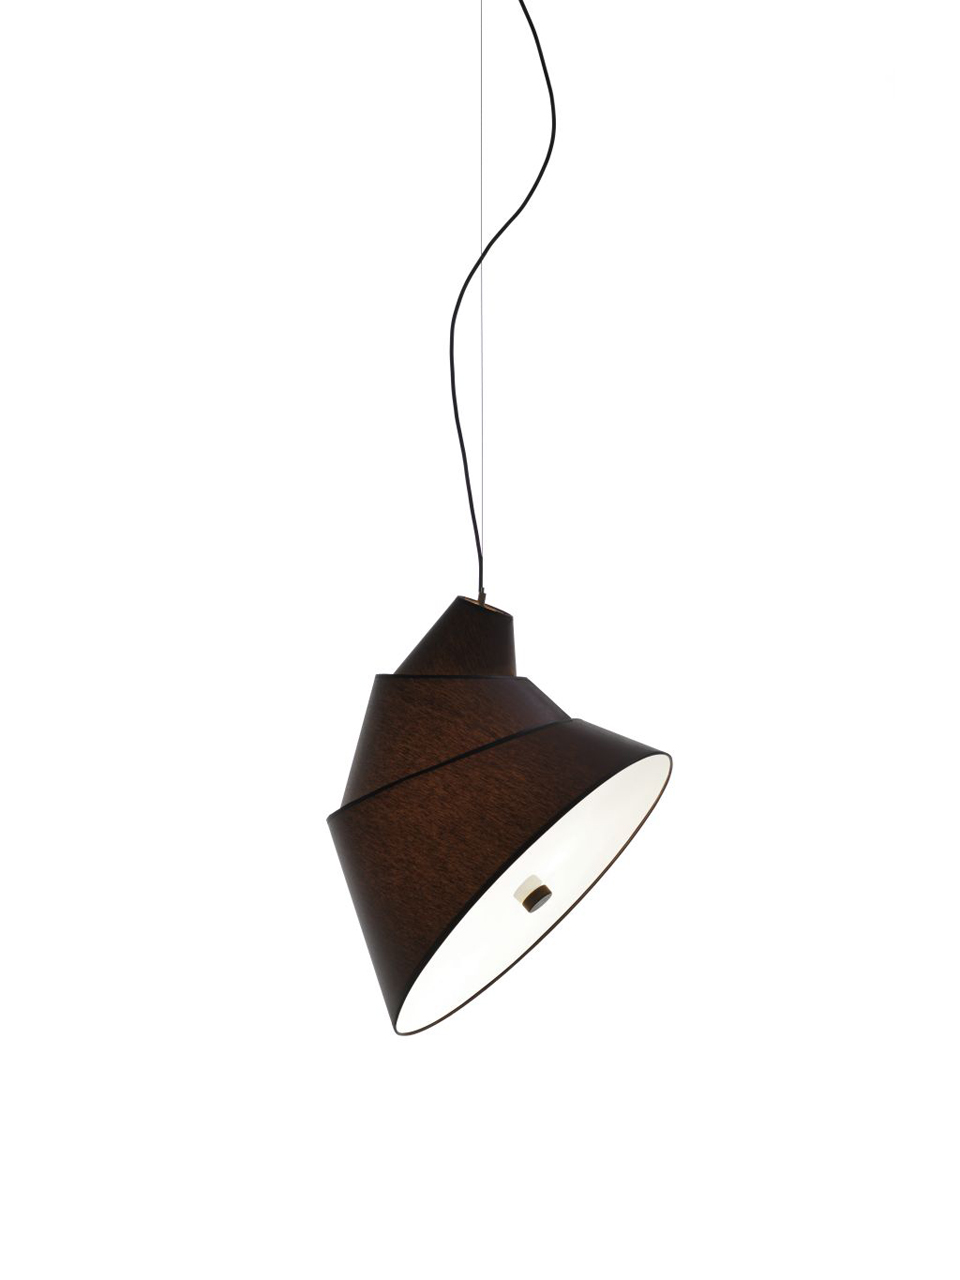 A Hanging Lamp Inspired by the Tower of Babel